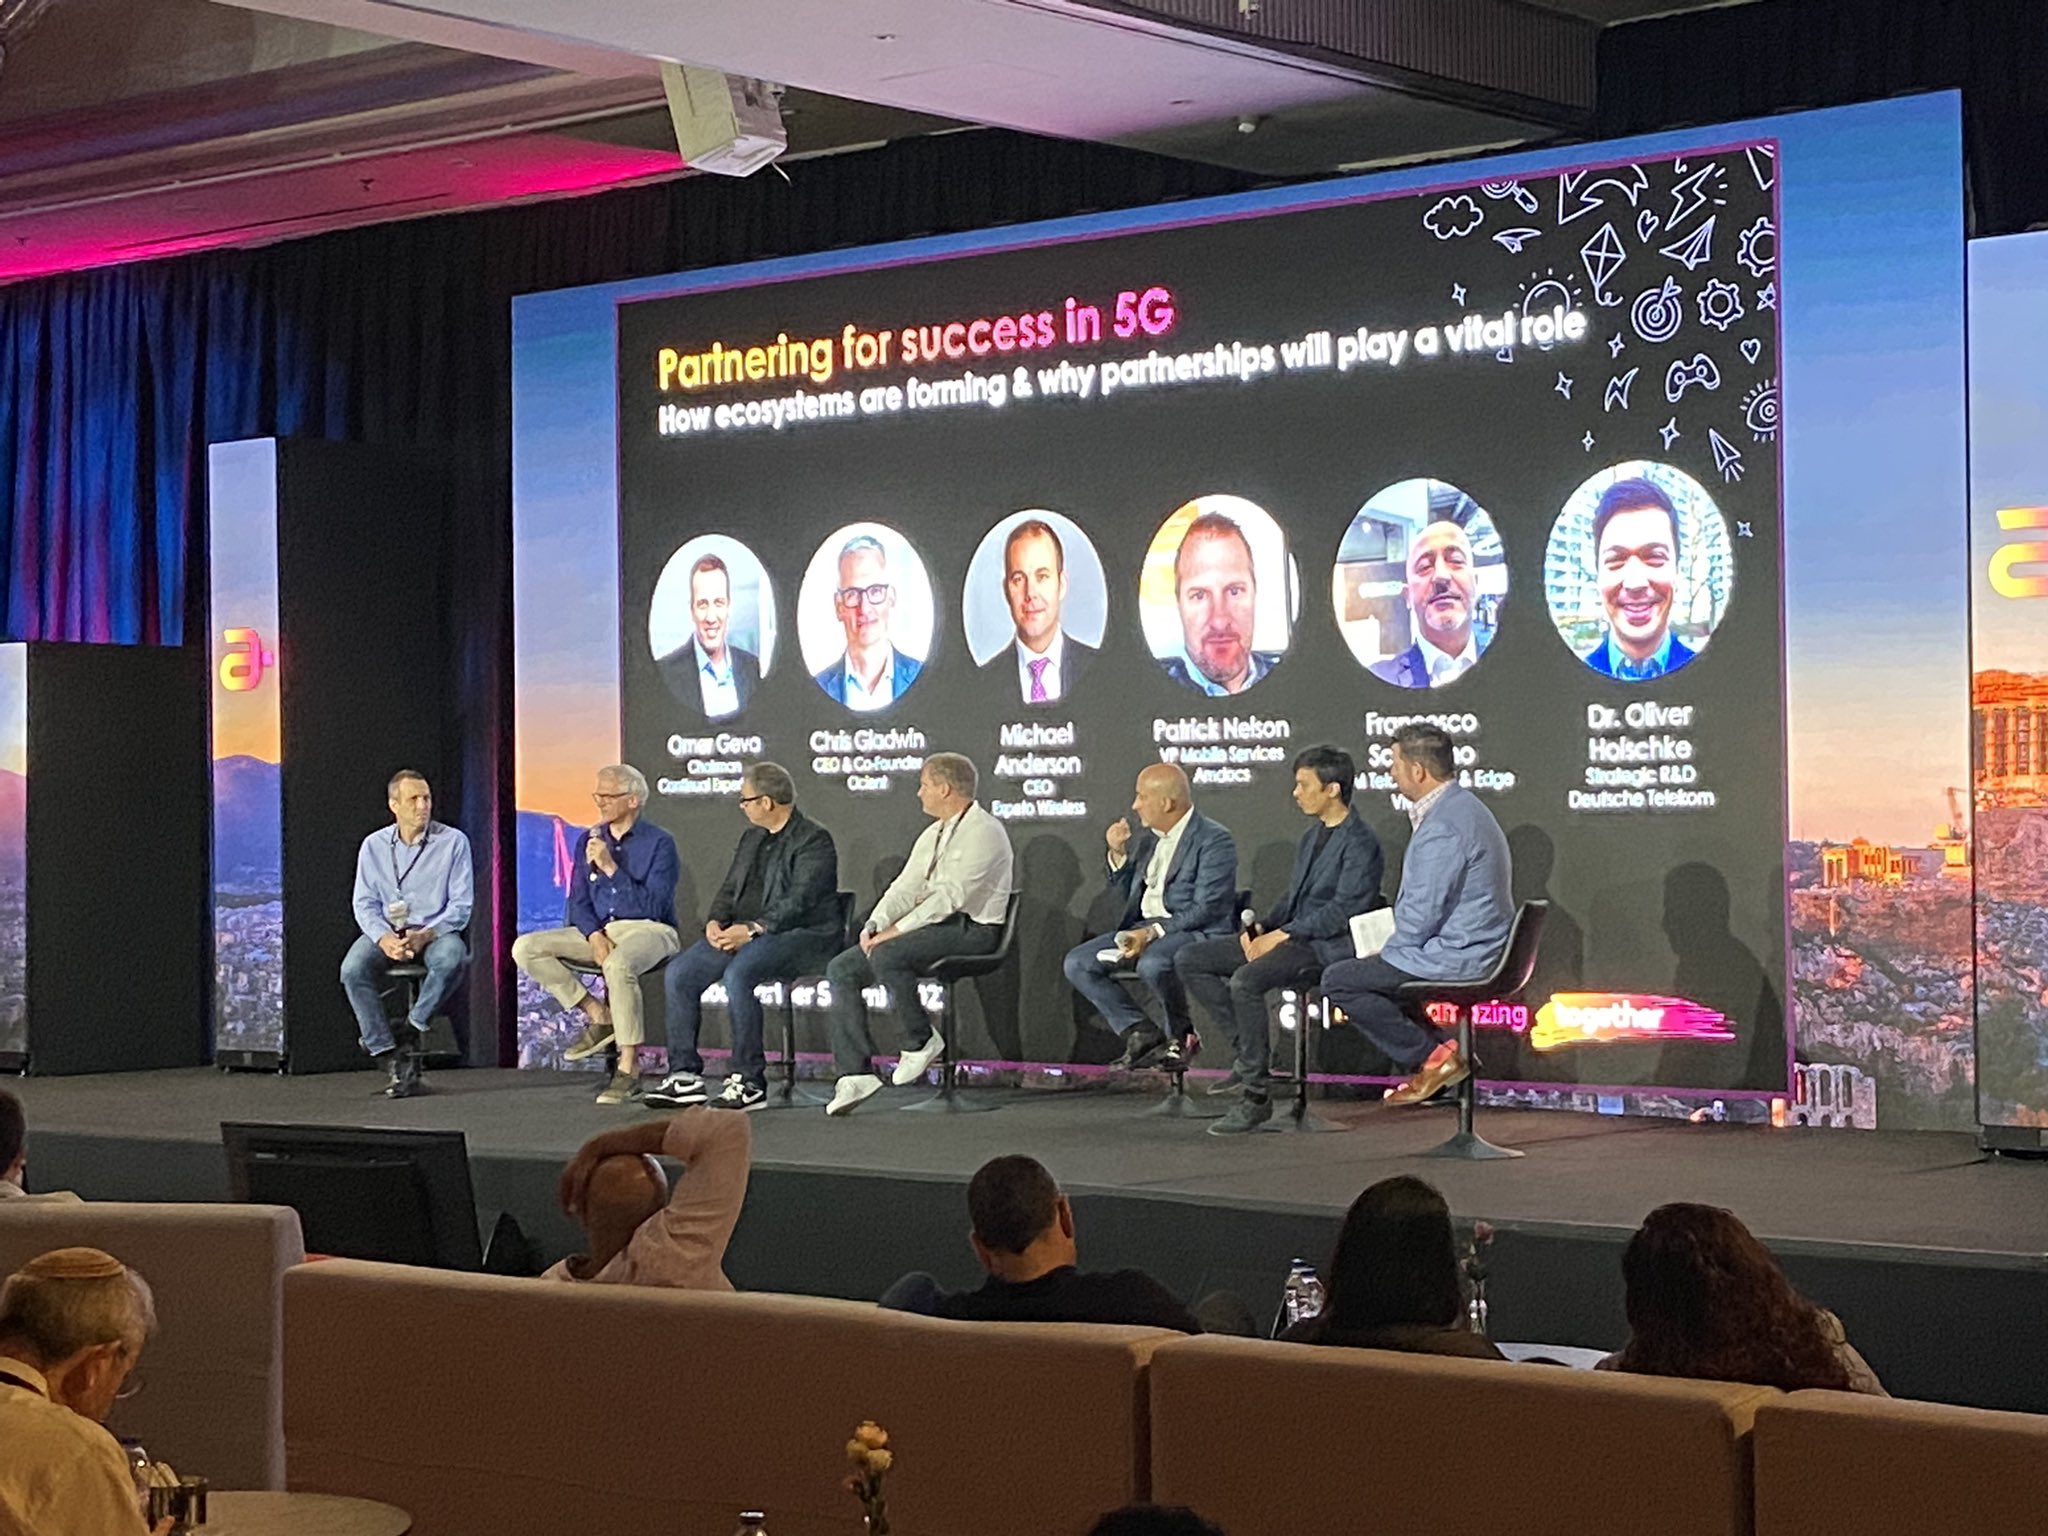 A picture of 5G panel at Amdocs Summit in Athens, Greece